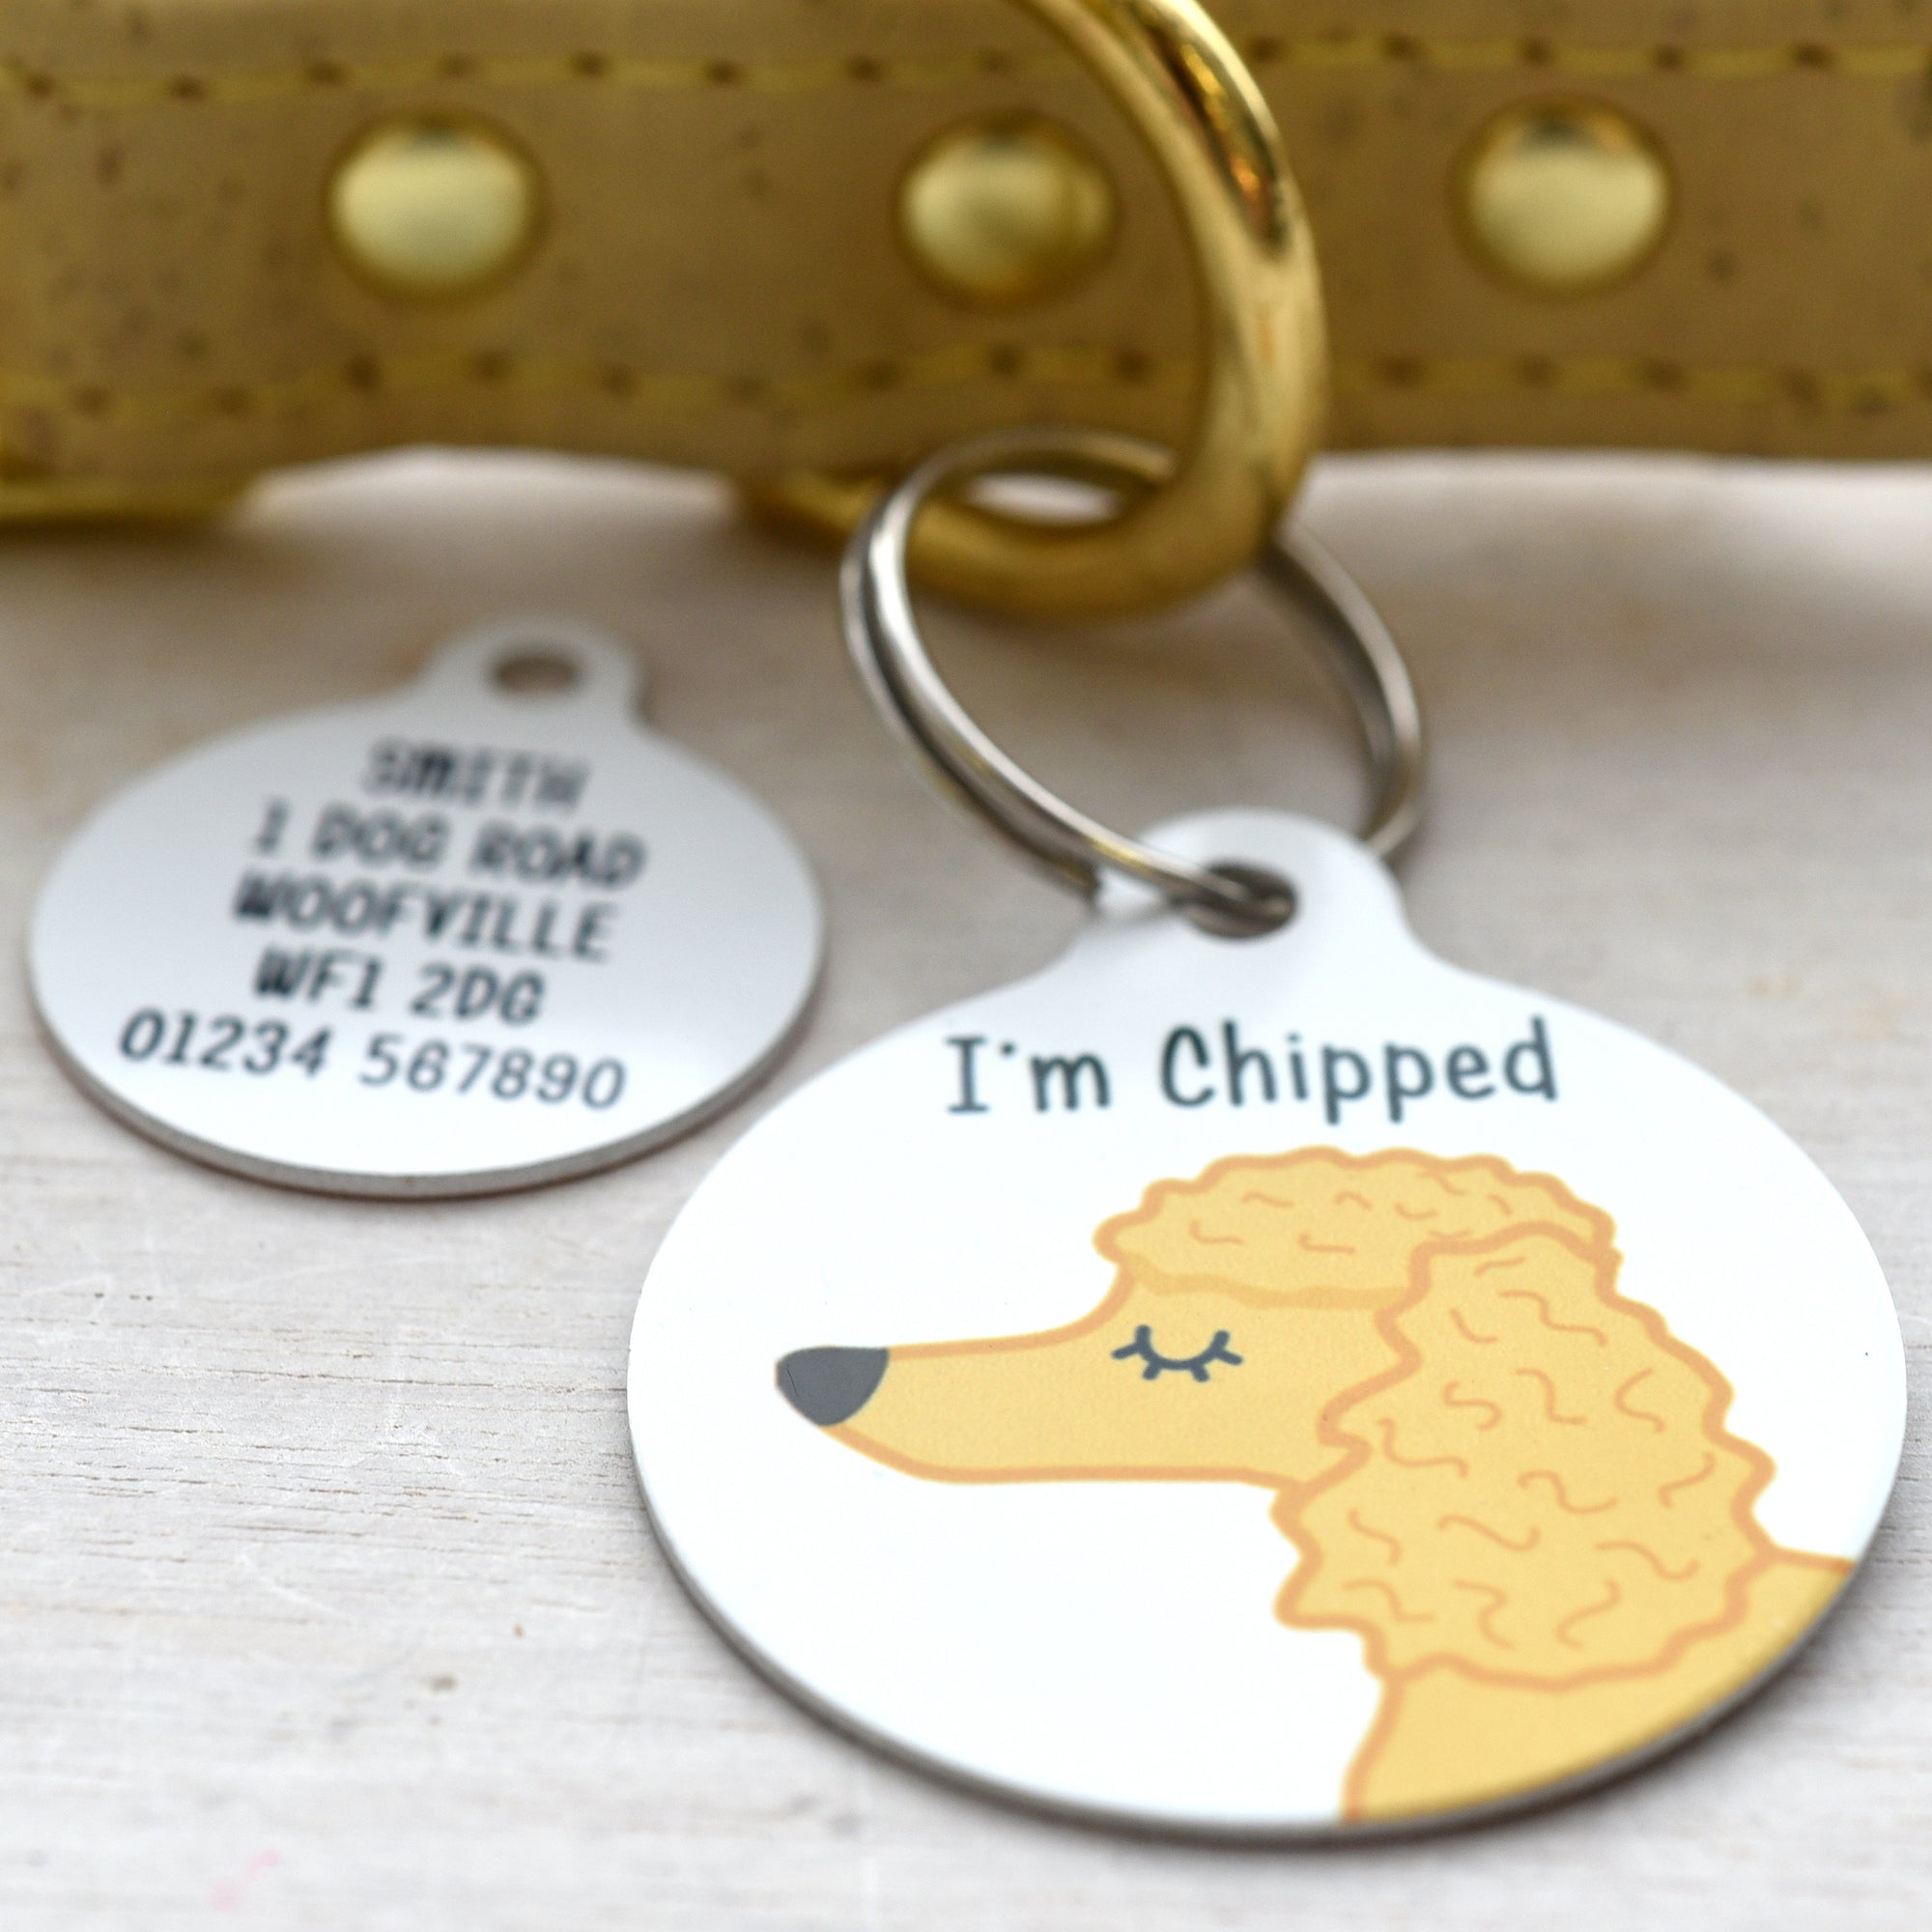 Poodle Personalised Dog Name ID Tag